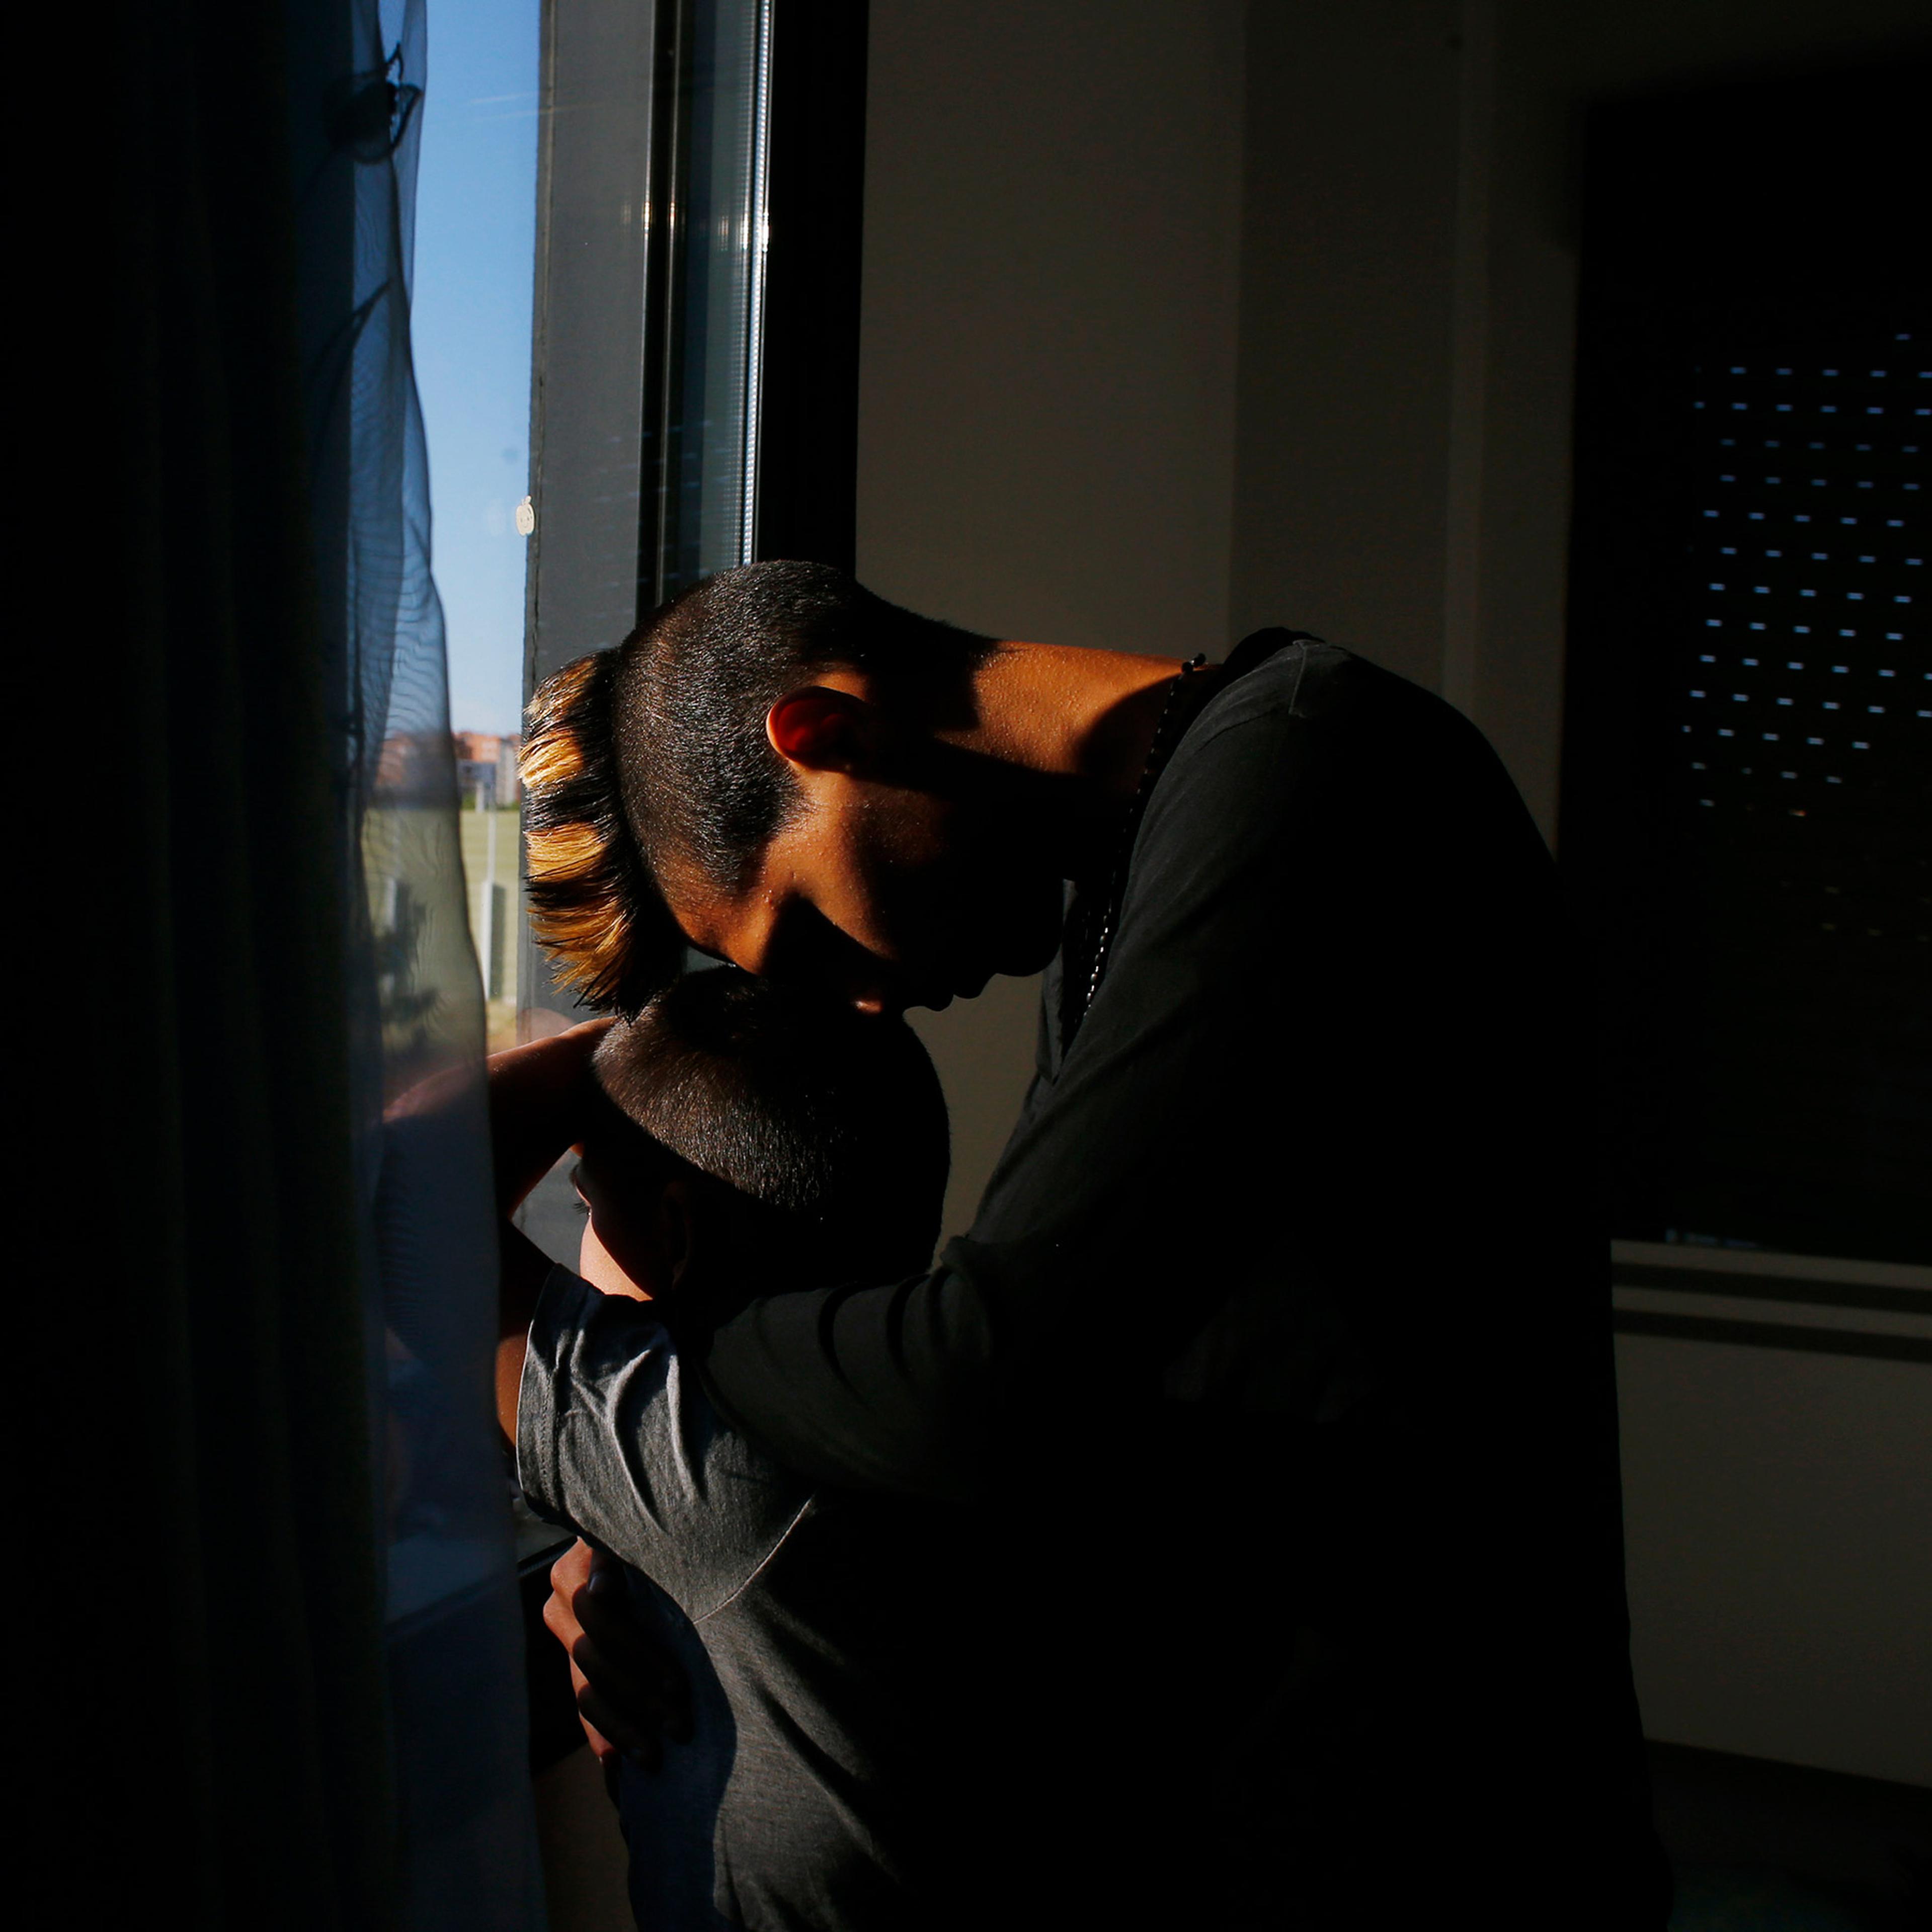 A man hugs his son in the light of a sunny day coming through a window in a darkened room